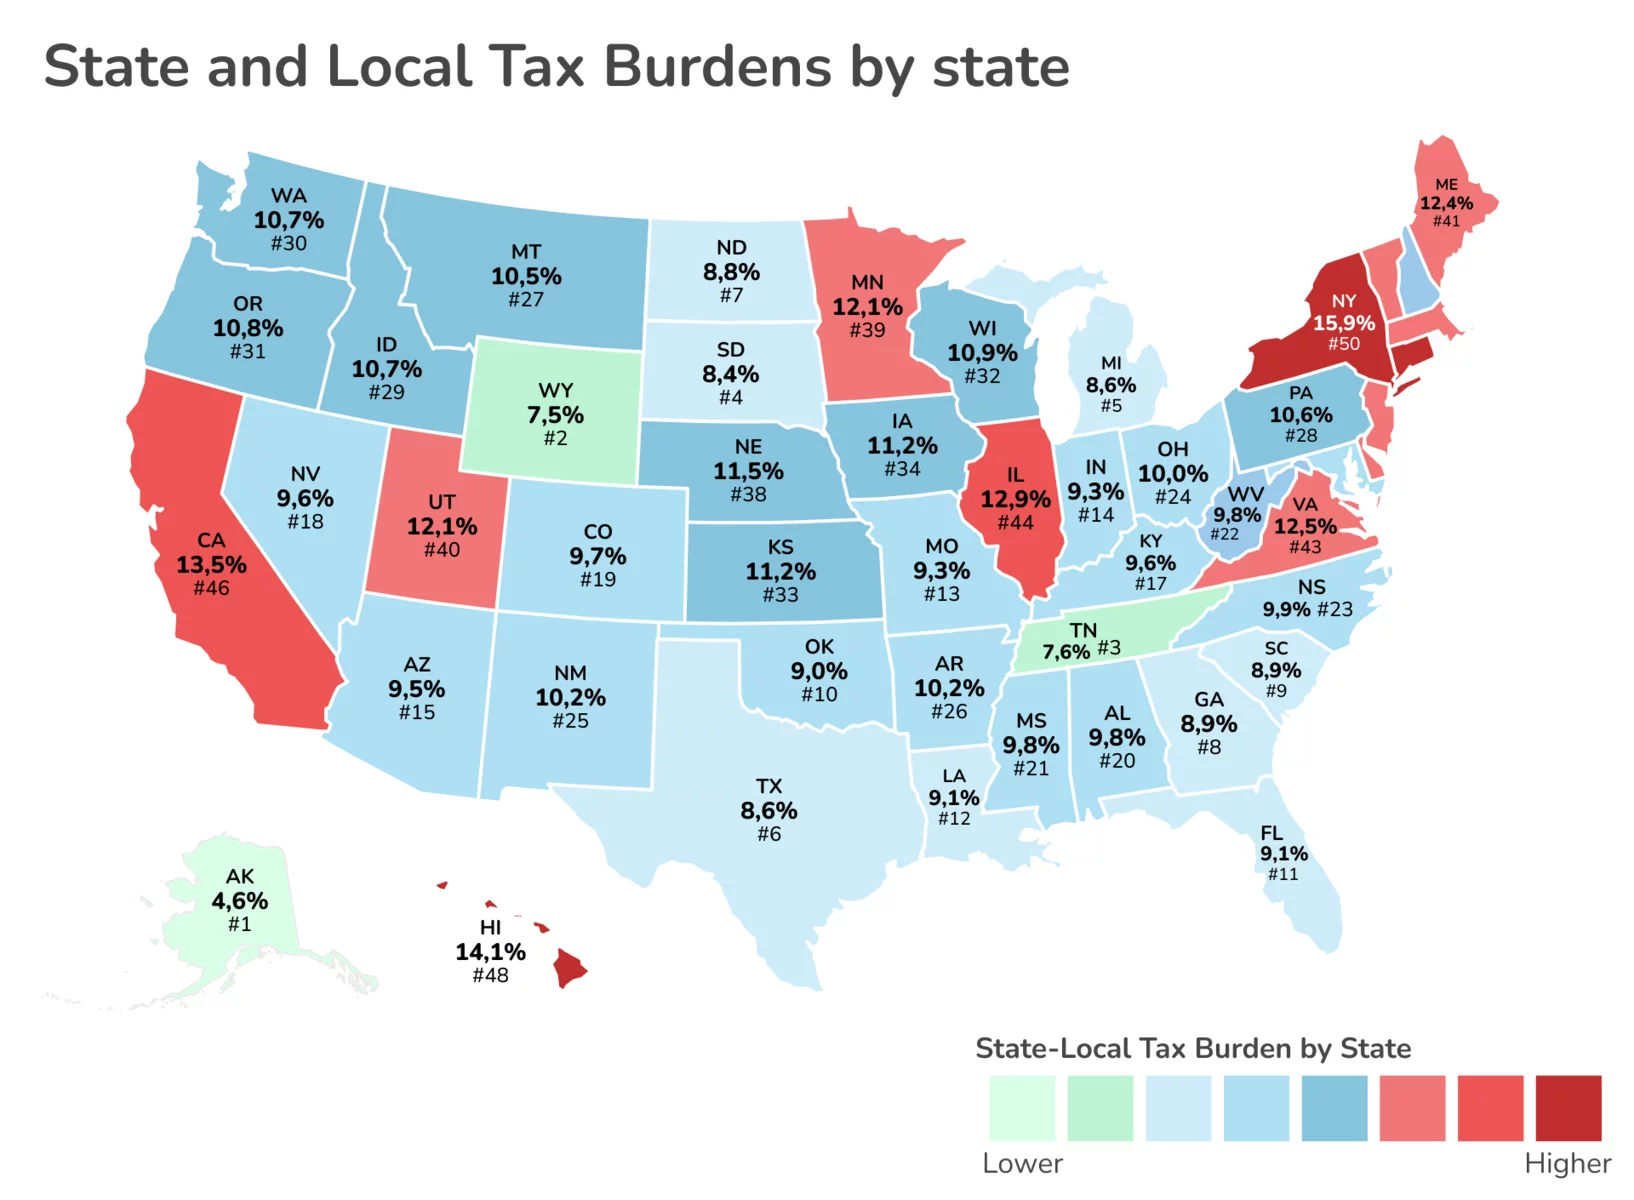 State and local tax burdens by state, map